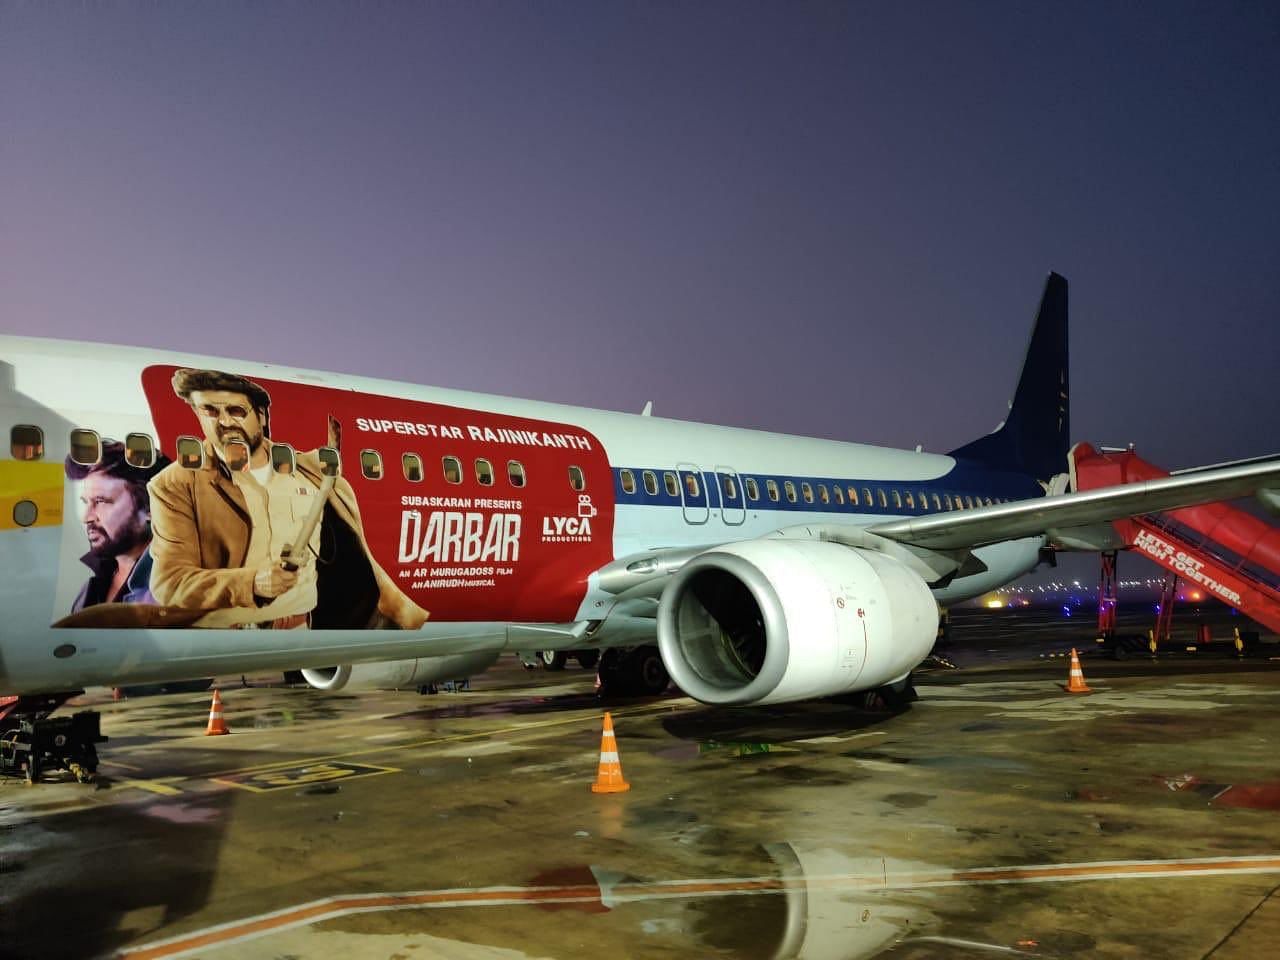 A SpiceJet aircraft with Darbar livery as part of branding for the Rajinikanth-starrer movie. (Credit: Twitter)